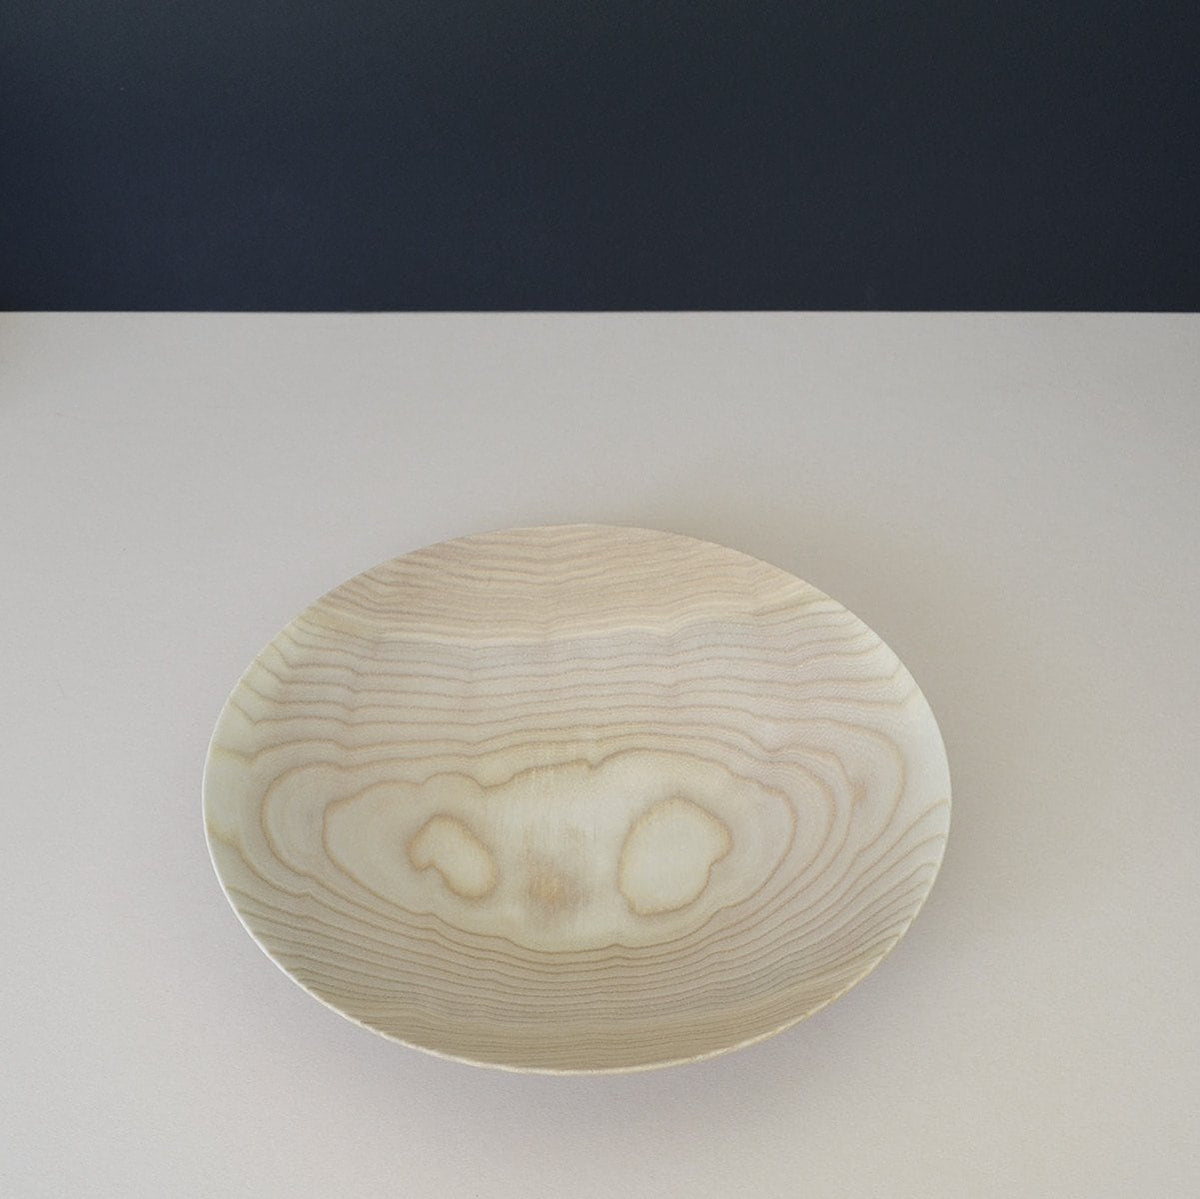 A wooden plate - small with a wood grain on it by Kihachi.